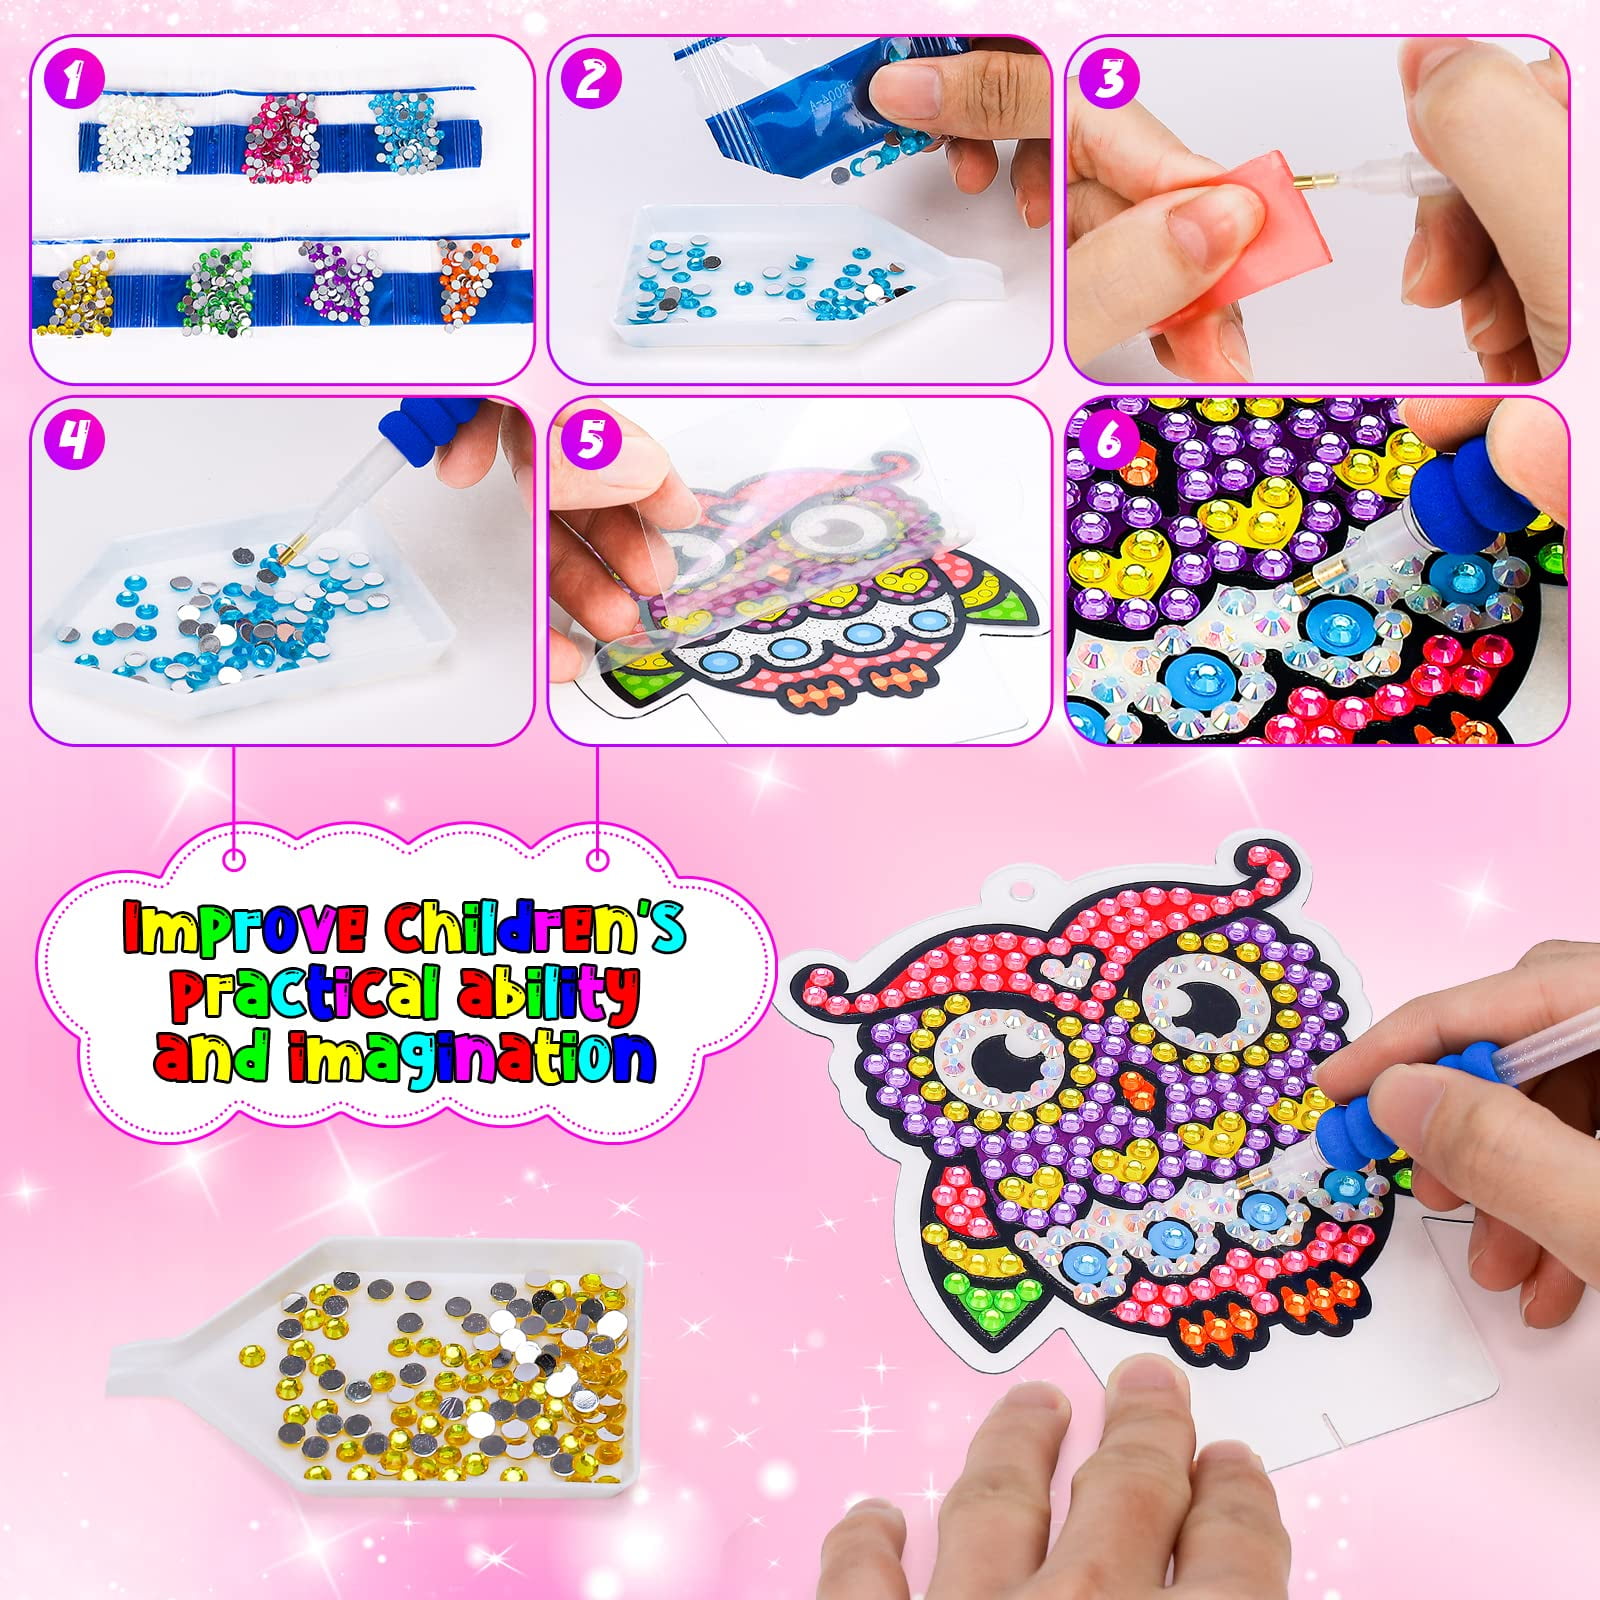 Wooden Frame Diamond Painting Kits: Kids Crafts for Girls Gifts Age 6 7 8 9 10 Turtle Diamond Dotz Painting Kits for 8-12 Kids Birthday Present Art